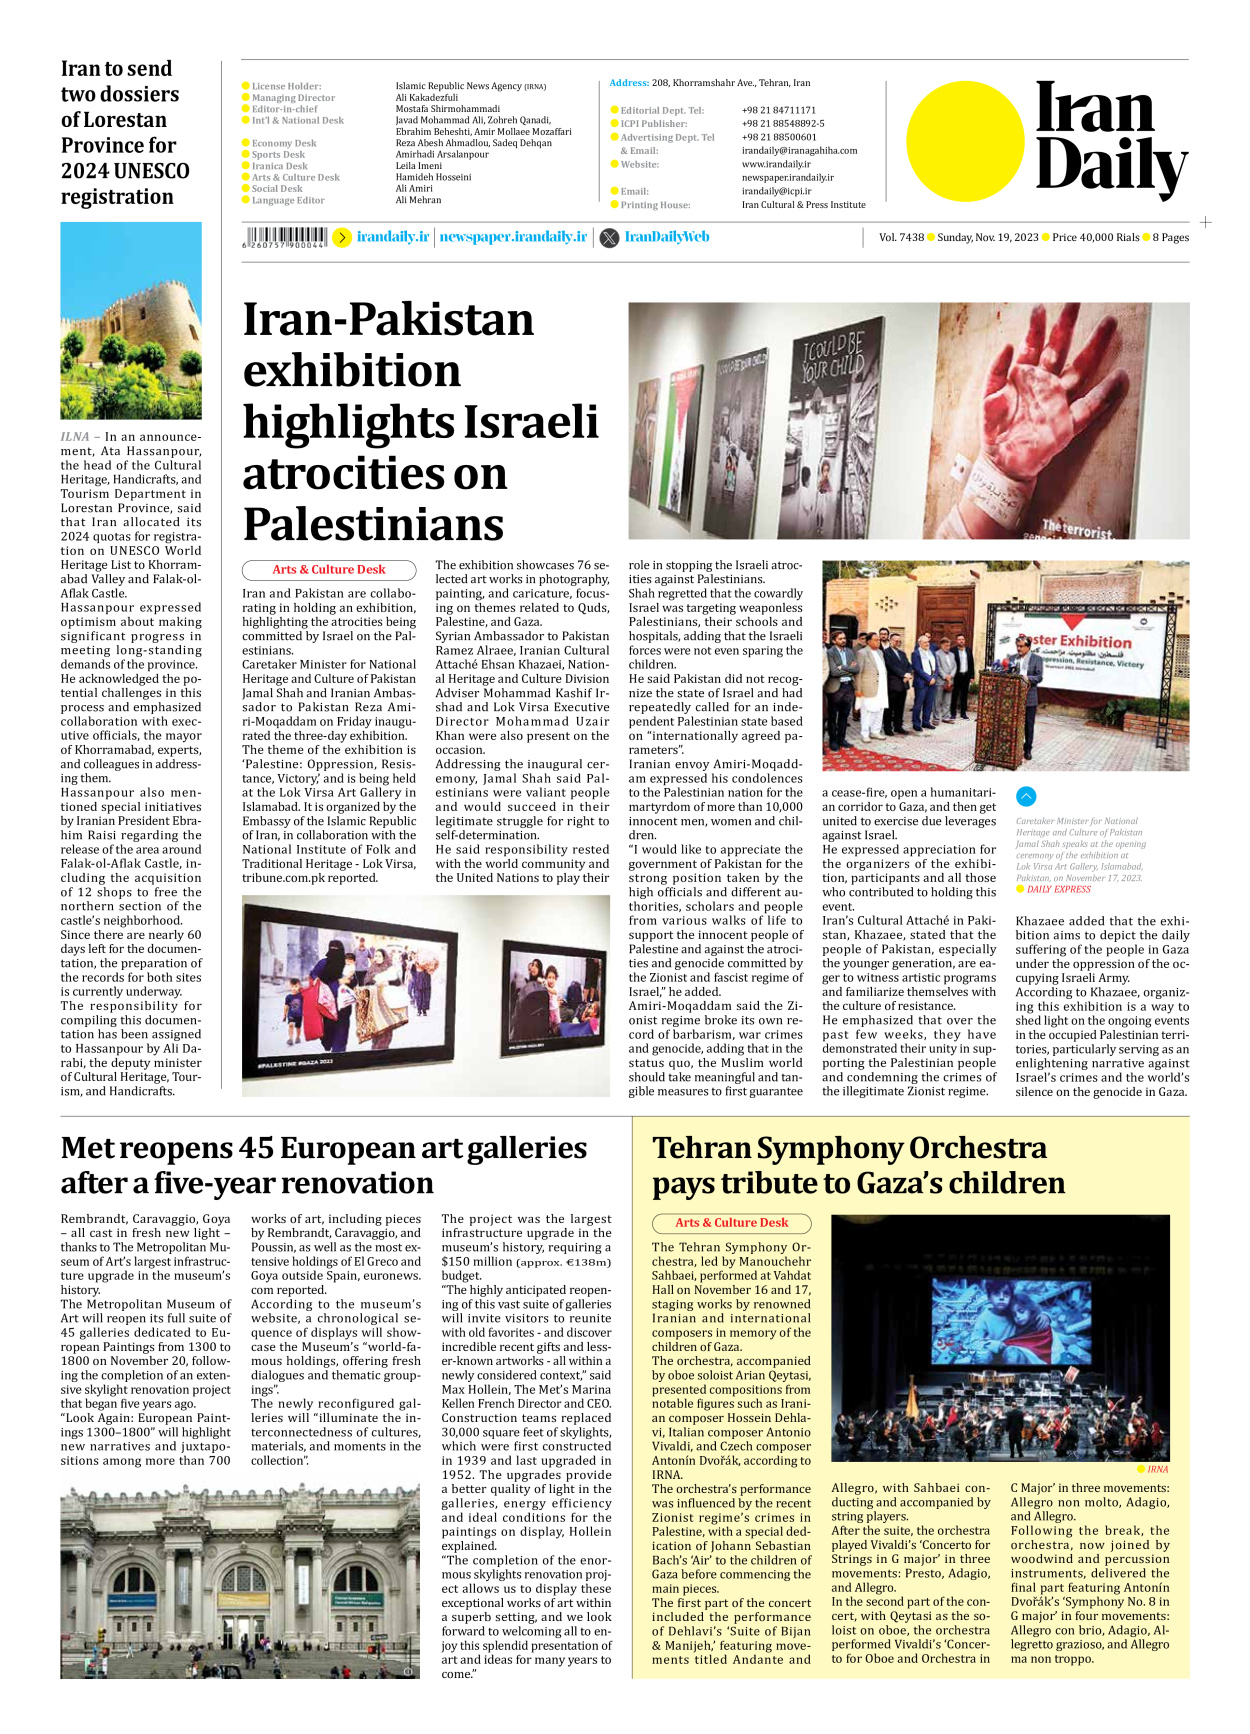 Iran Daily - Number Seven Thousand Four Hundred and Thirty Eight - 19 November 2023 - Page 8